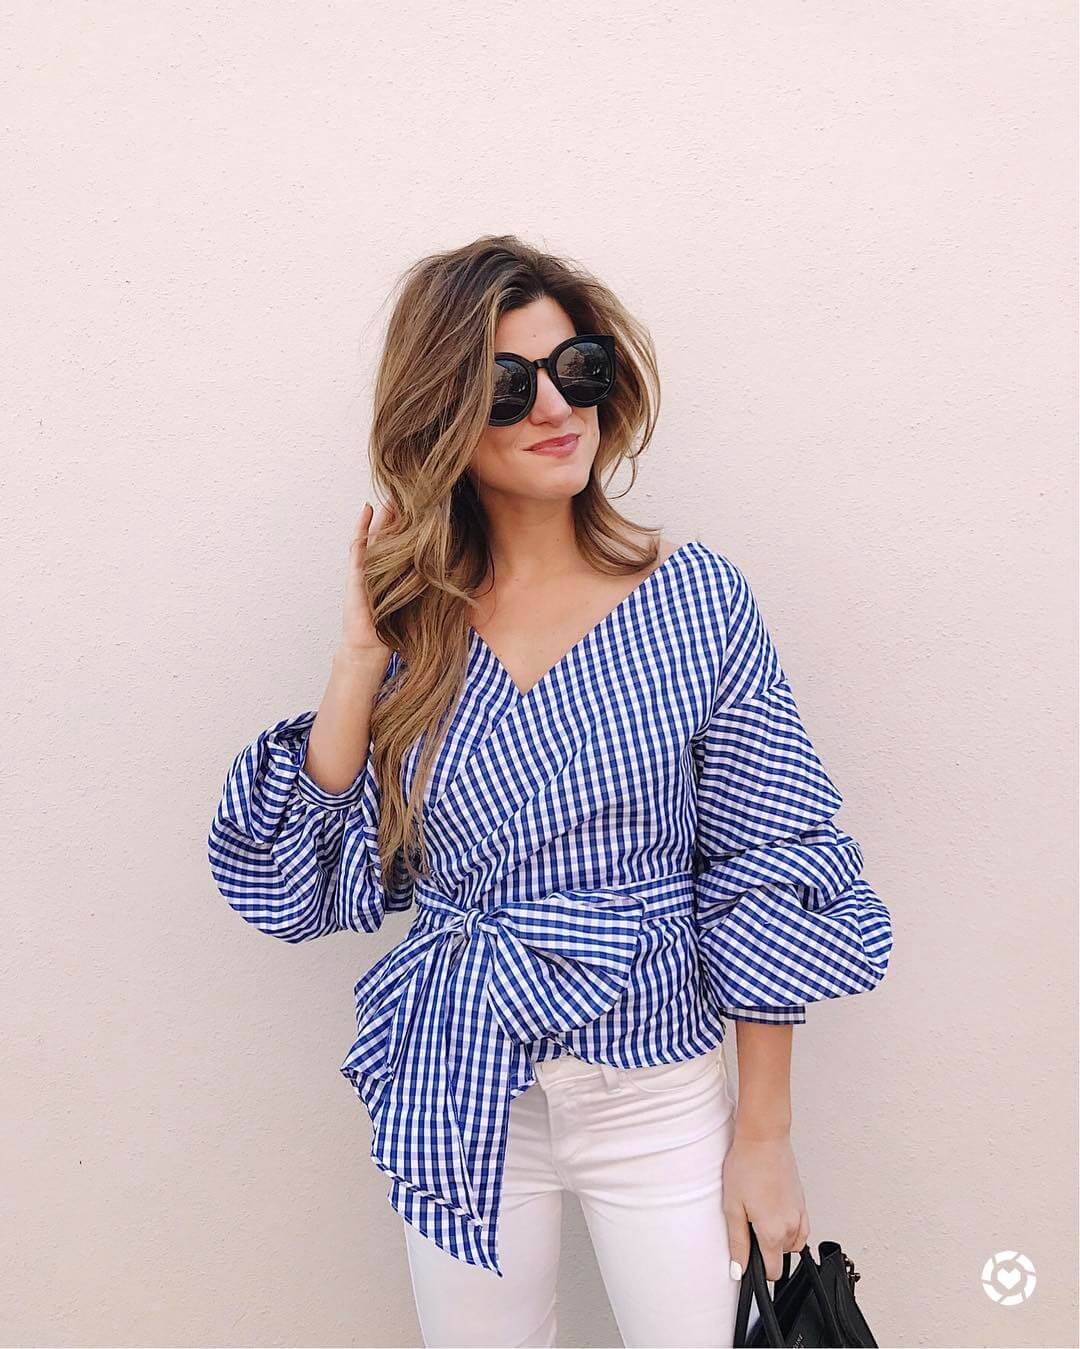 Wrap Top, Blue Checkered Top, White Jeans, Black Sunnies